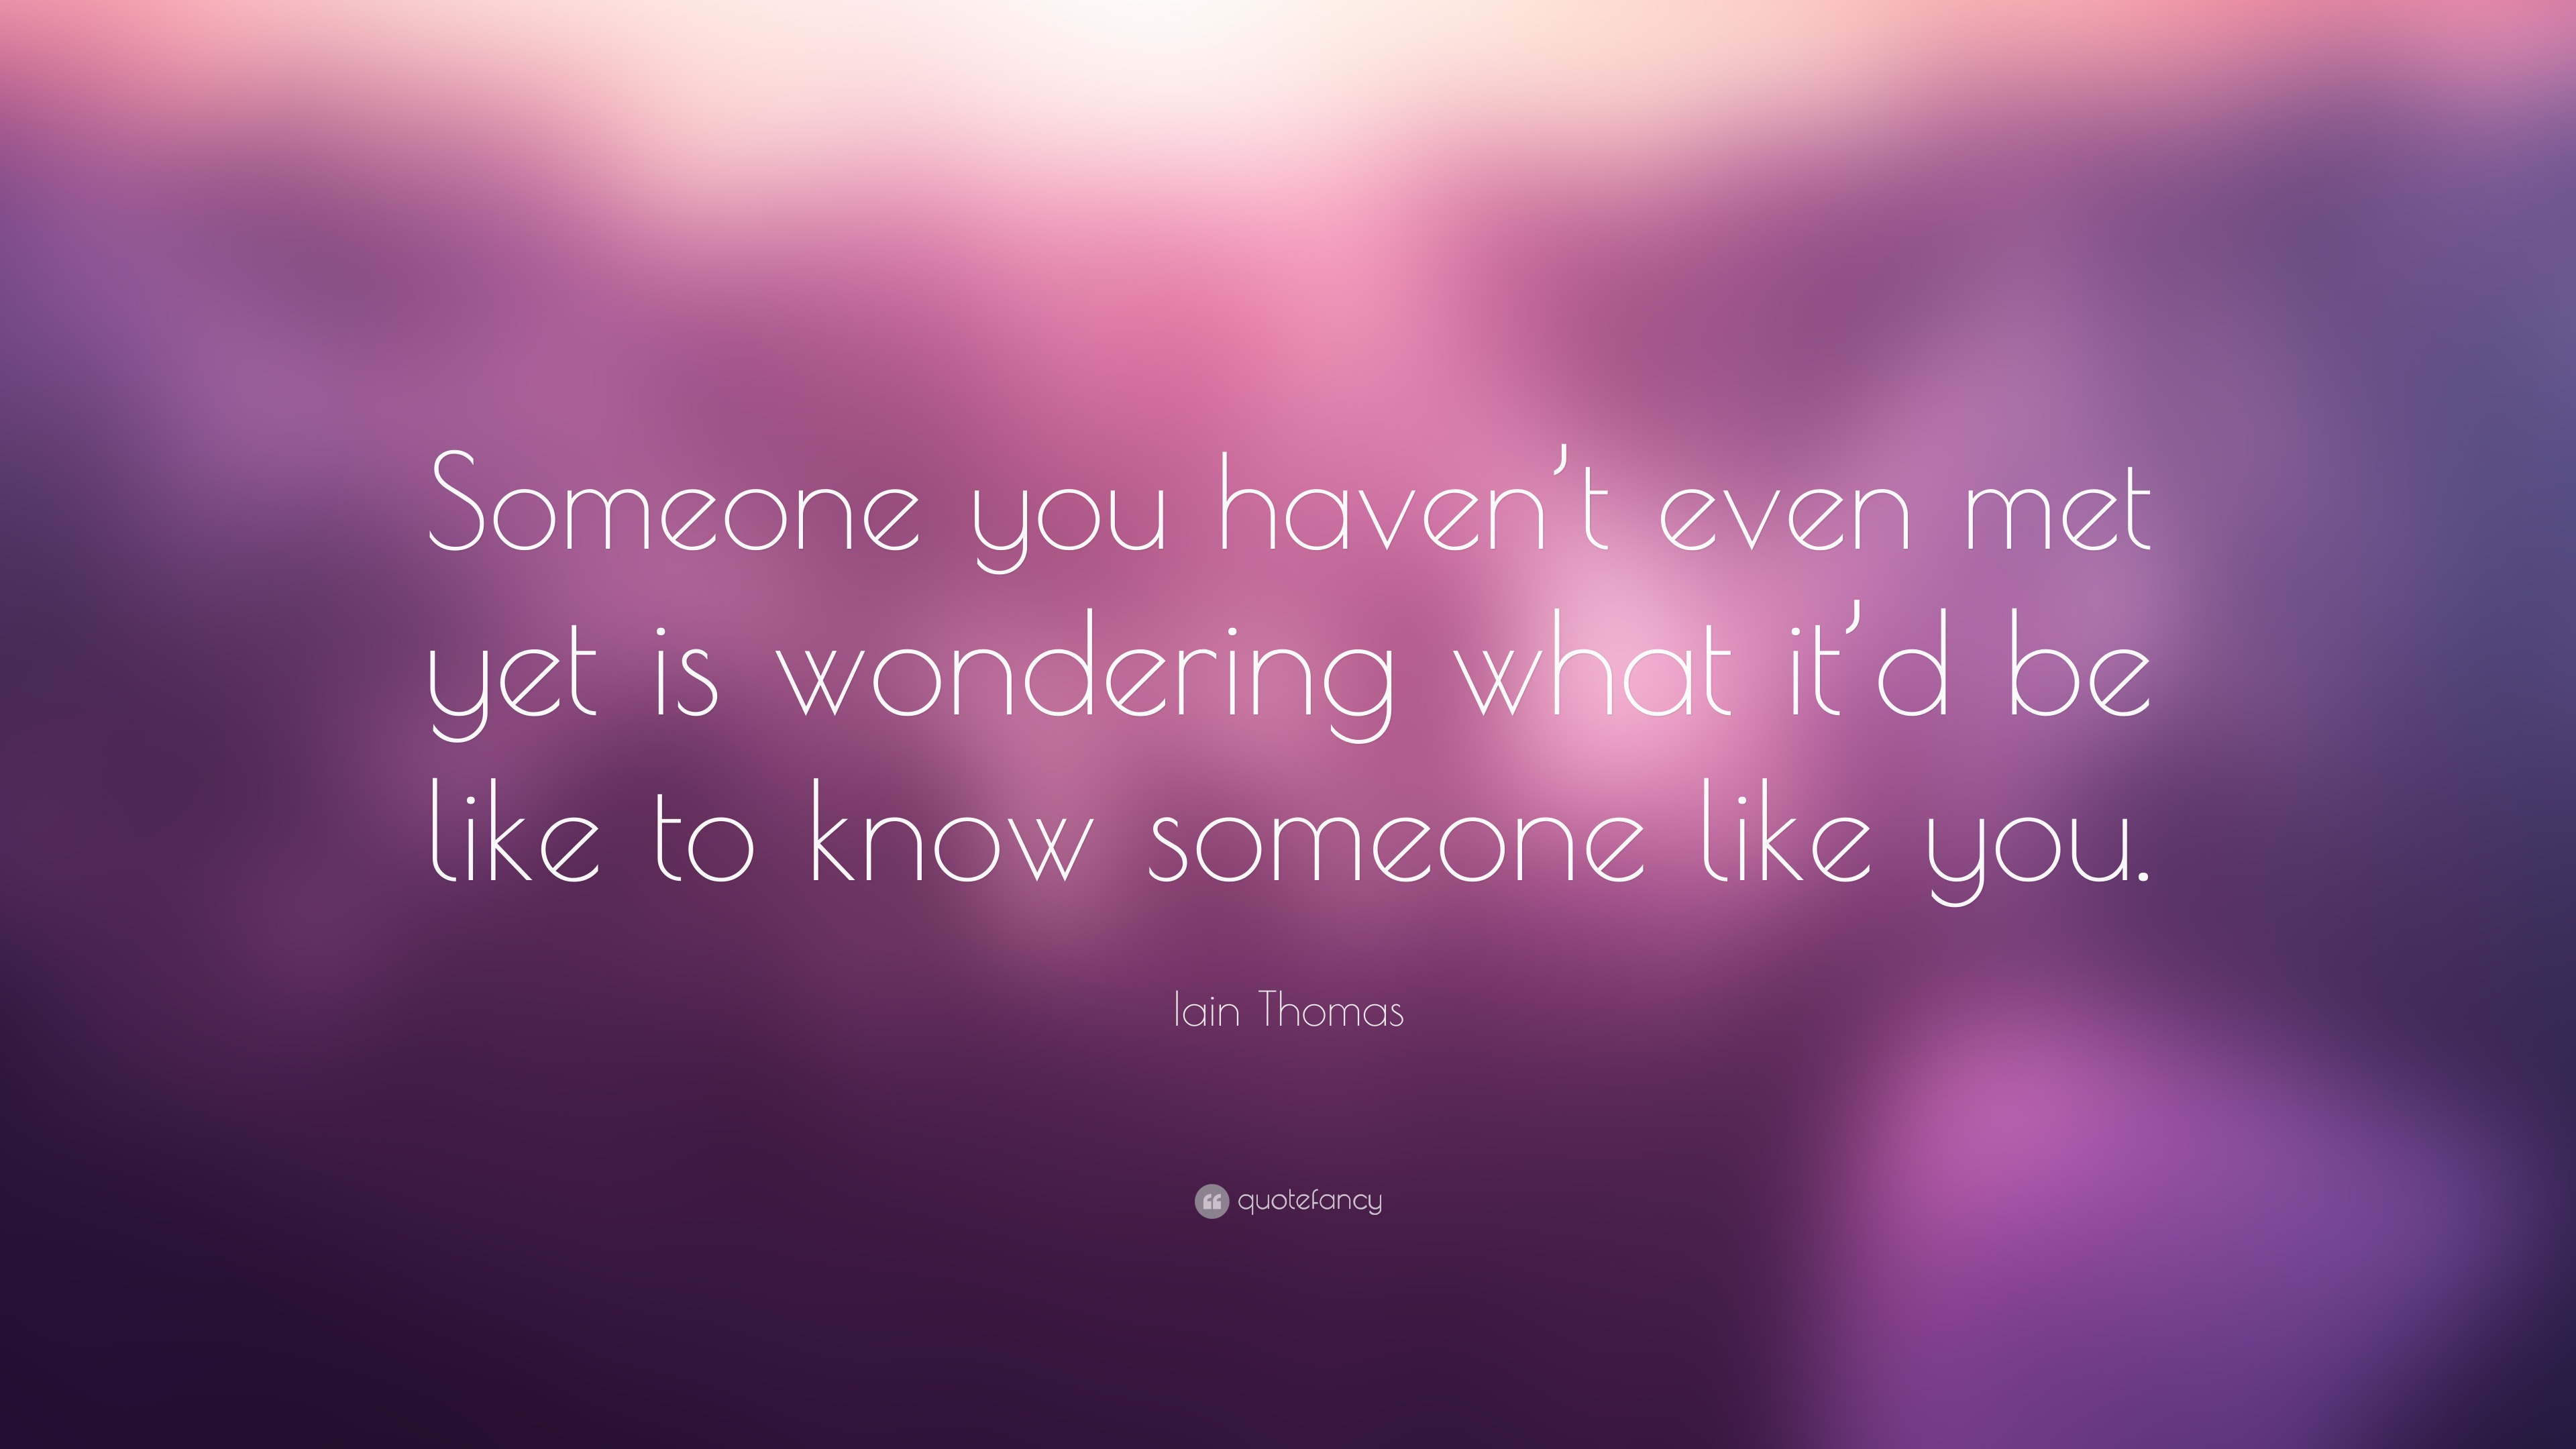 Iain Thomas Quote “someone You Haven’t Even Met Yet Is Wondering What It’d Be Like To Know